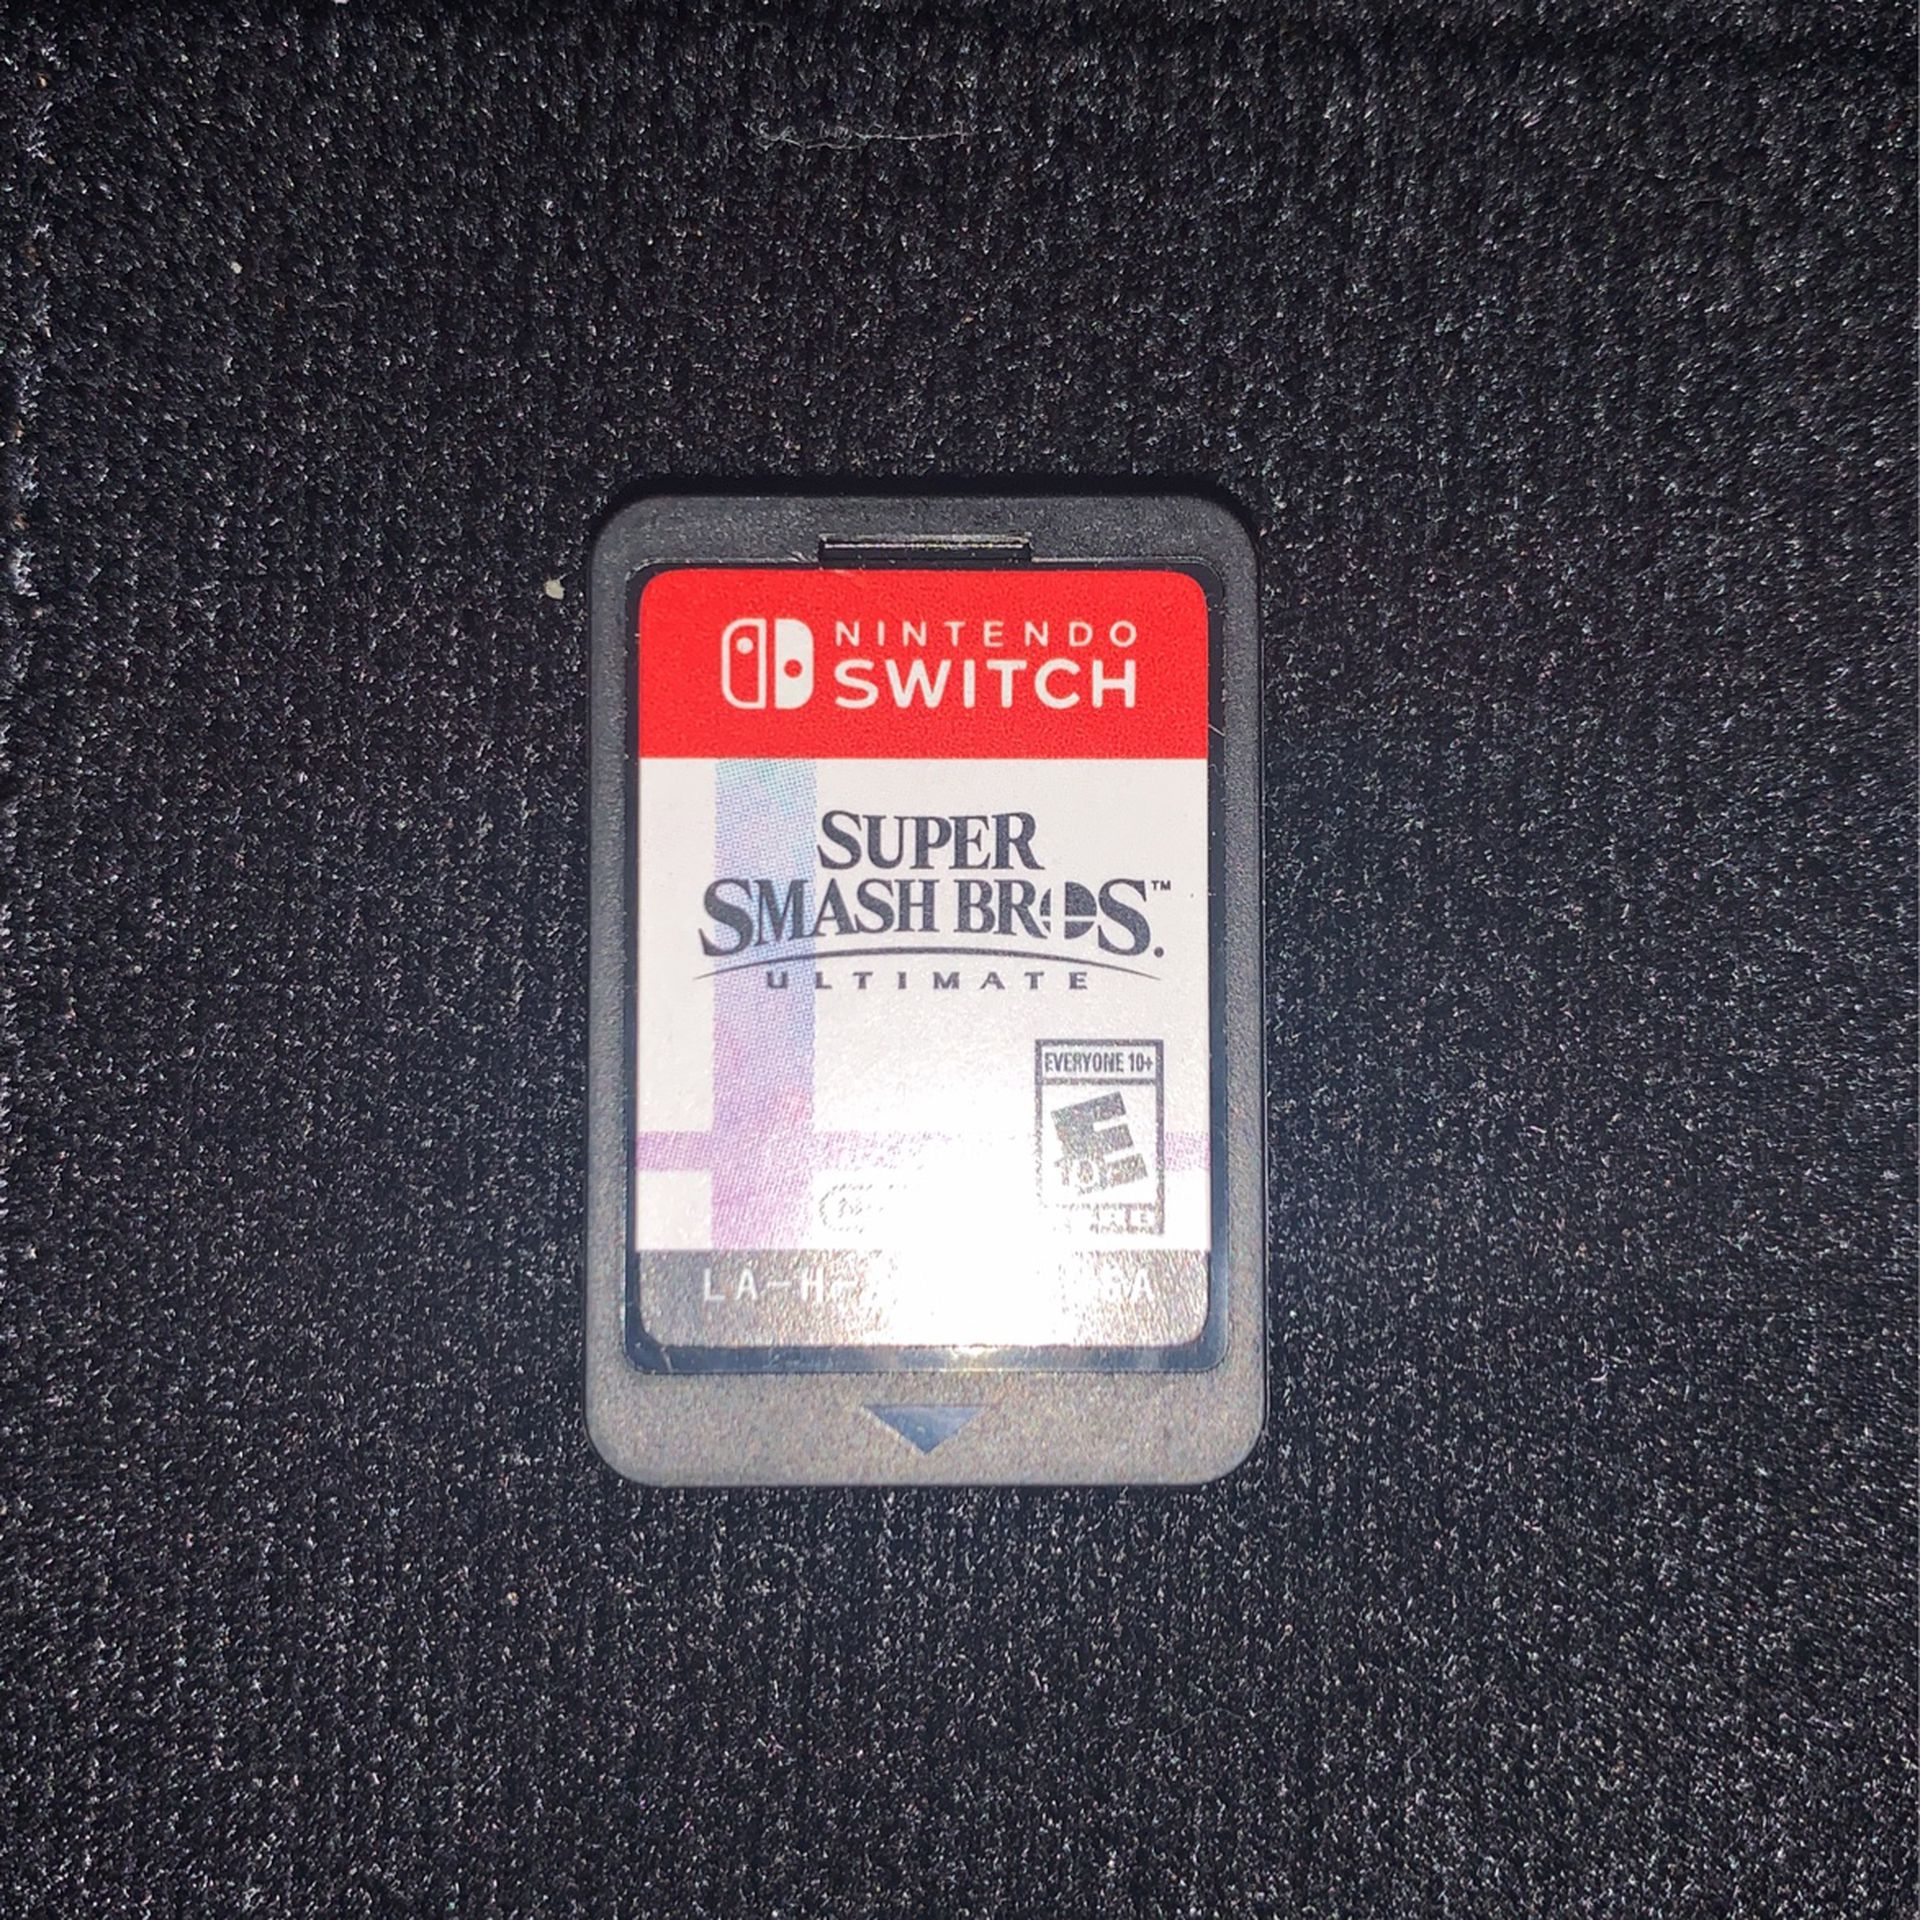 Nintendo Switch Games For Sale 